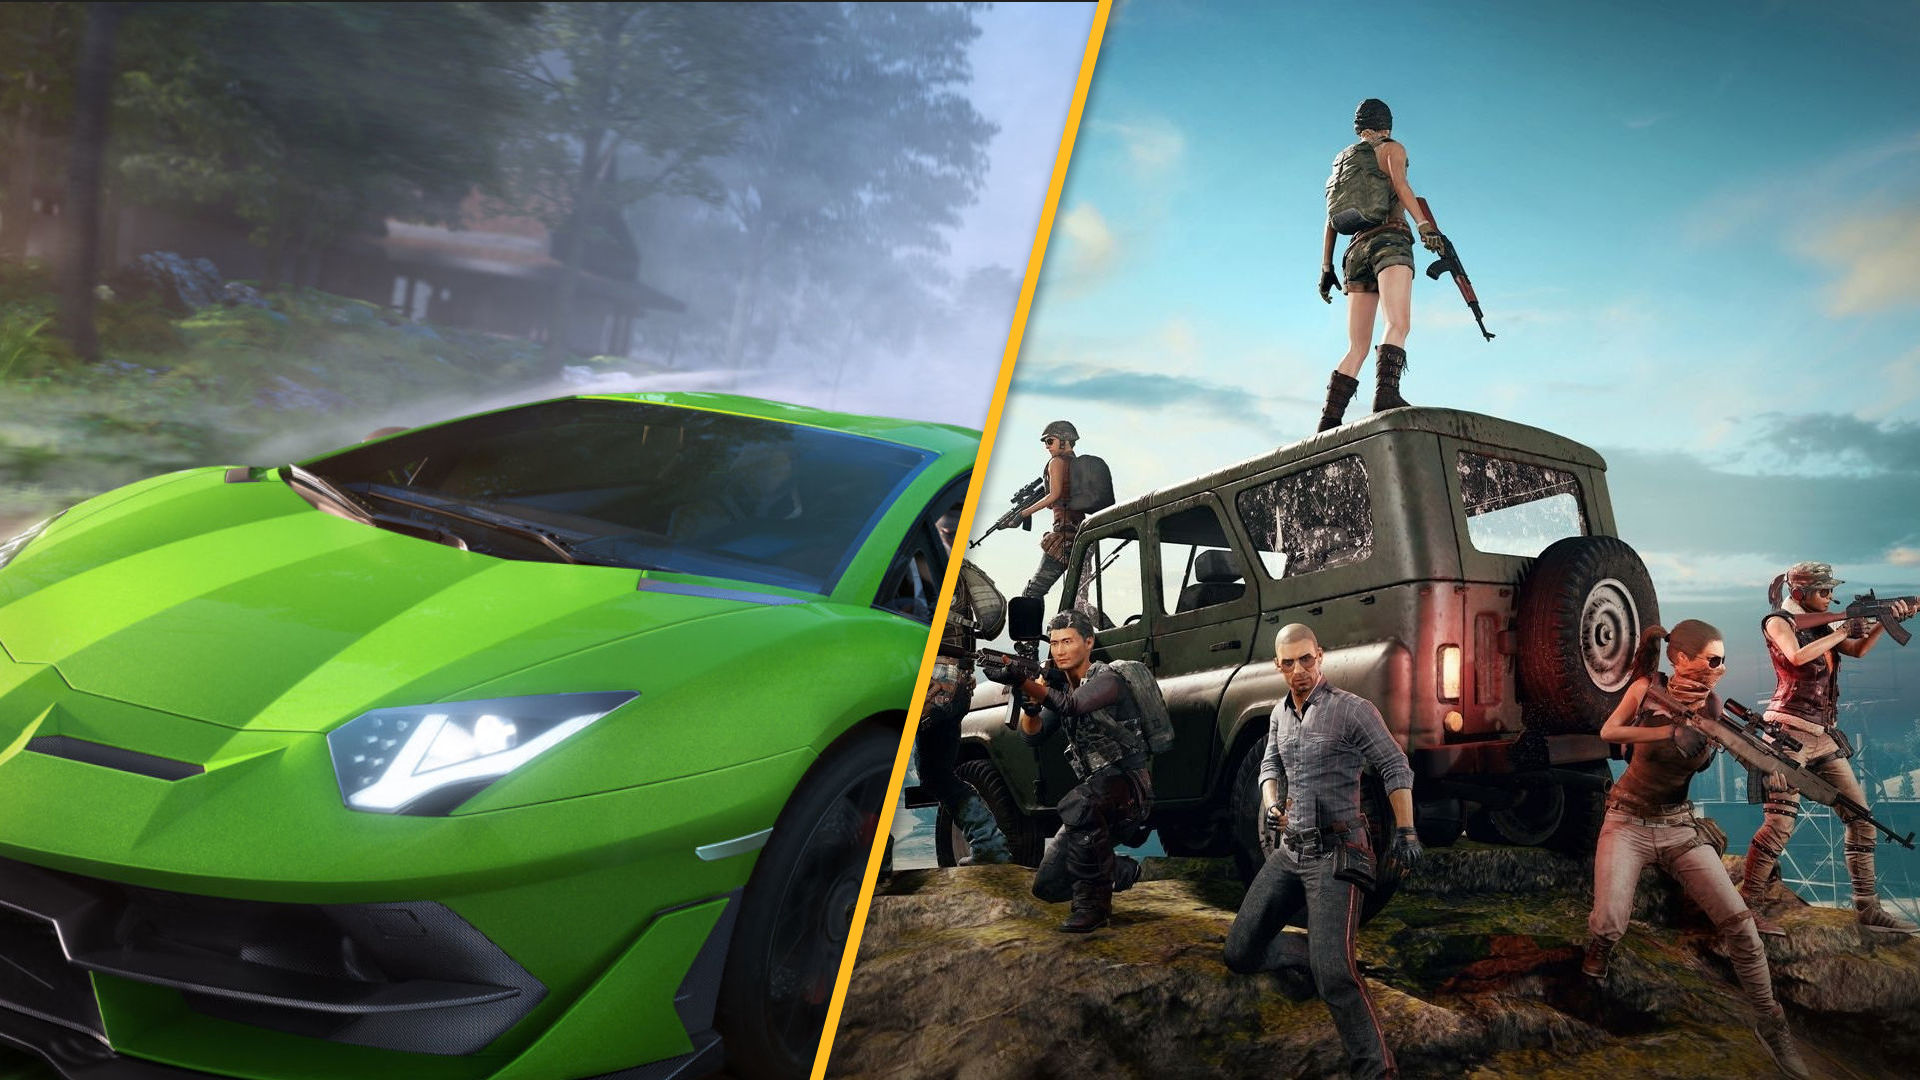 Feel the need for speed with the PUBG Mobile Lamborghini collaboration |  Pocket Tactics